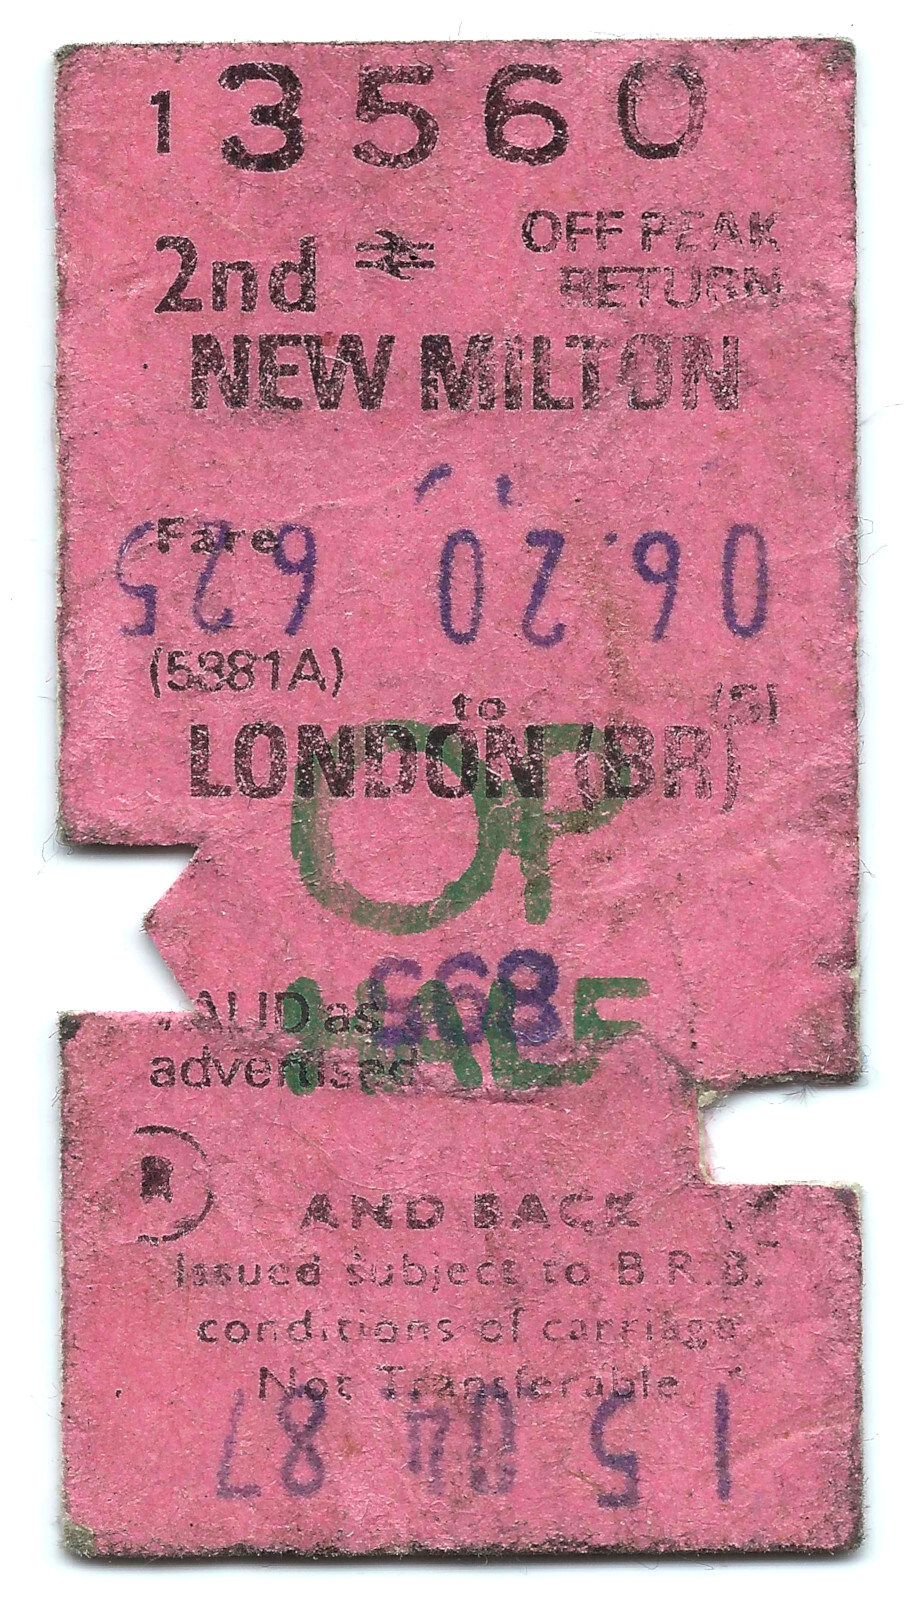 A BR rail ticket from New Milton to London from Mother's 40th, Burton, Christchurch, Dorset - 18th April 1987